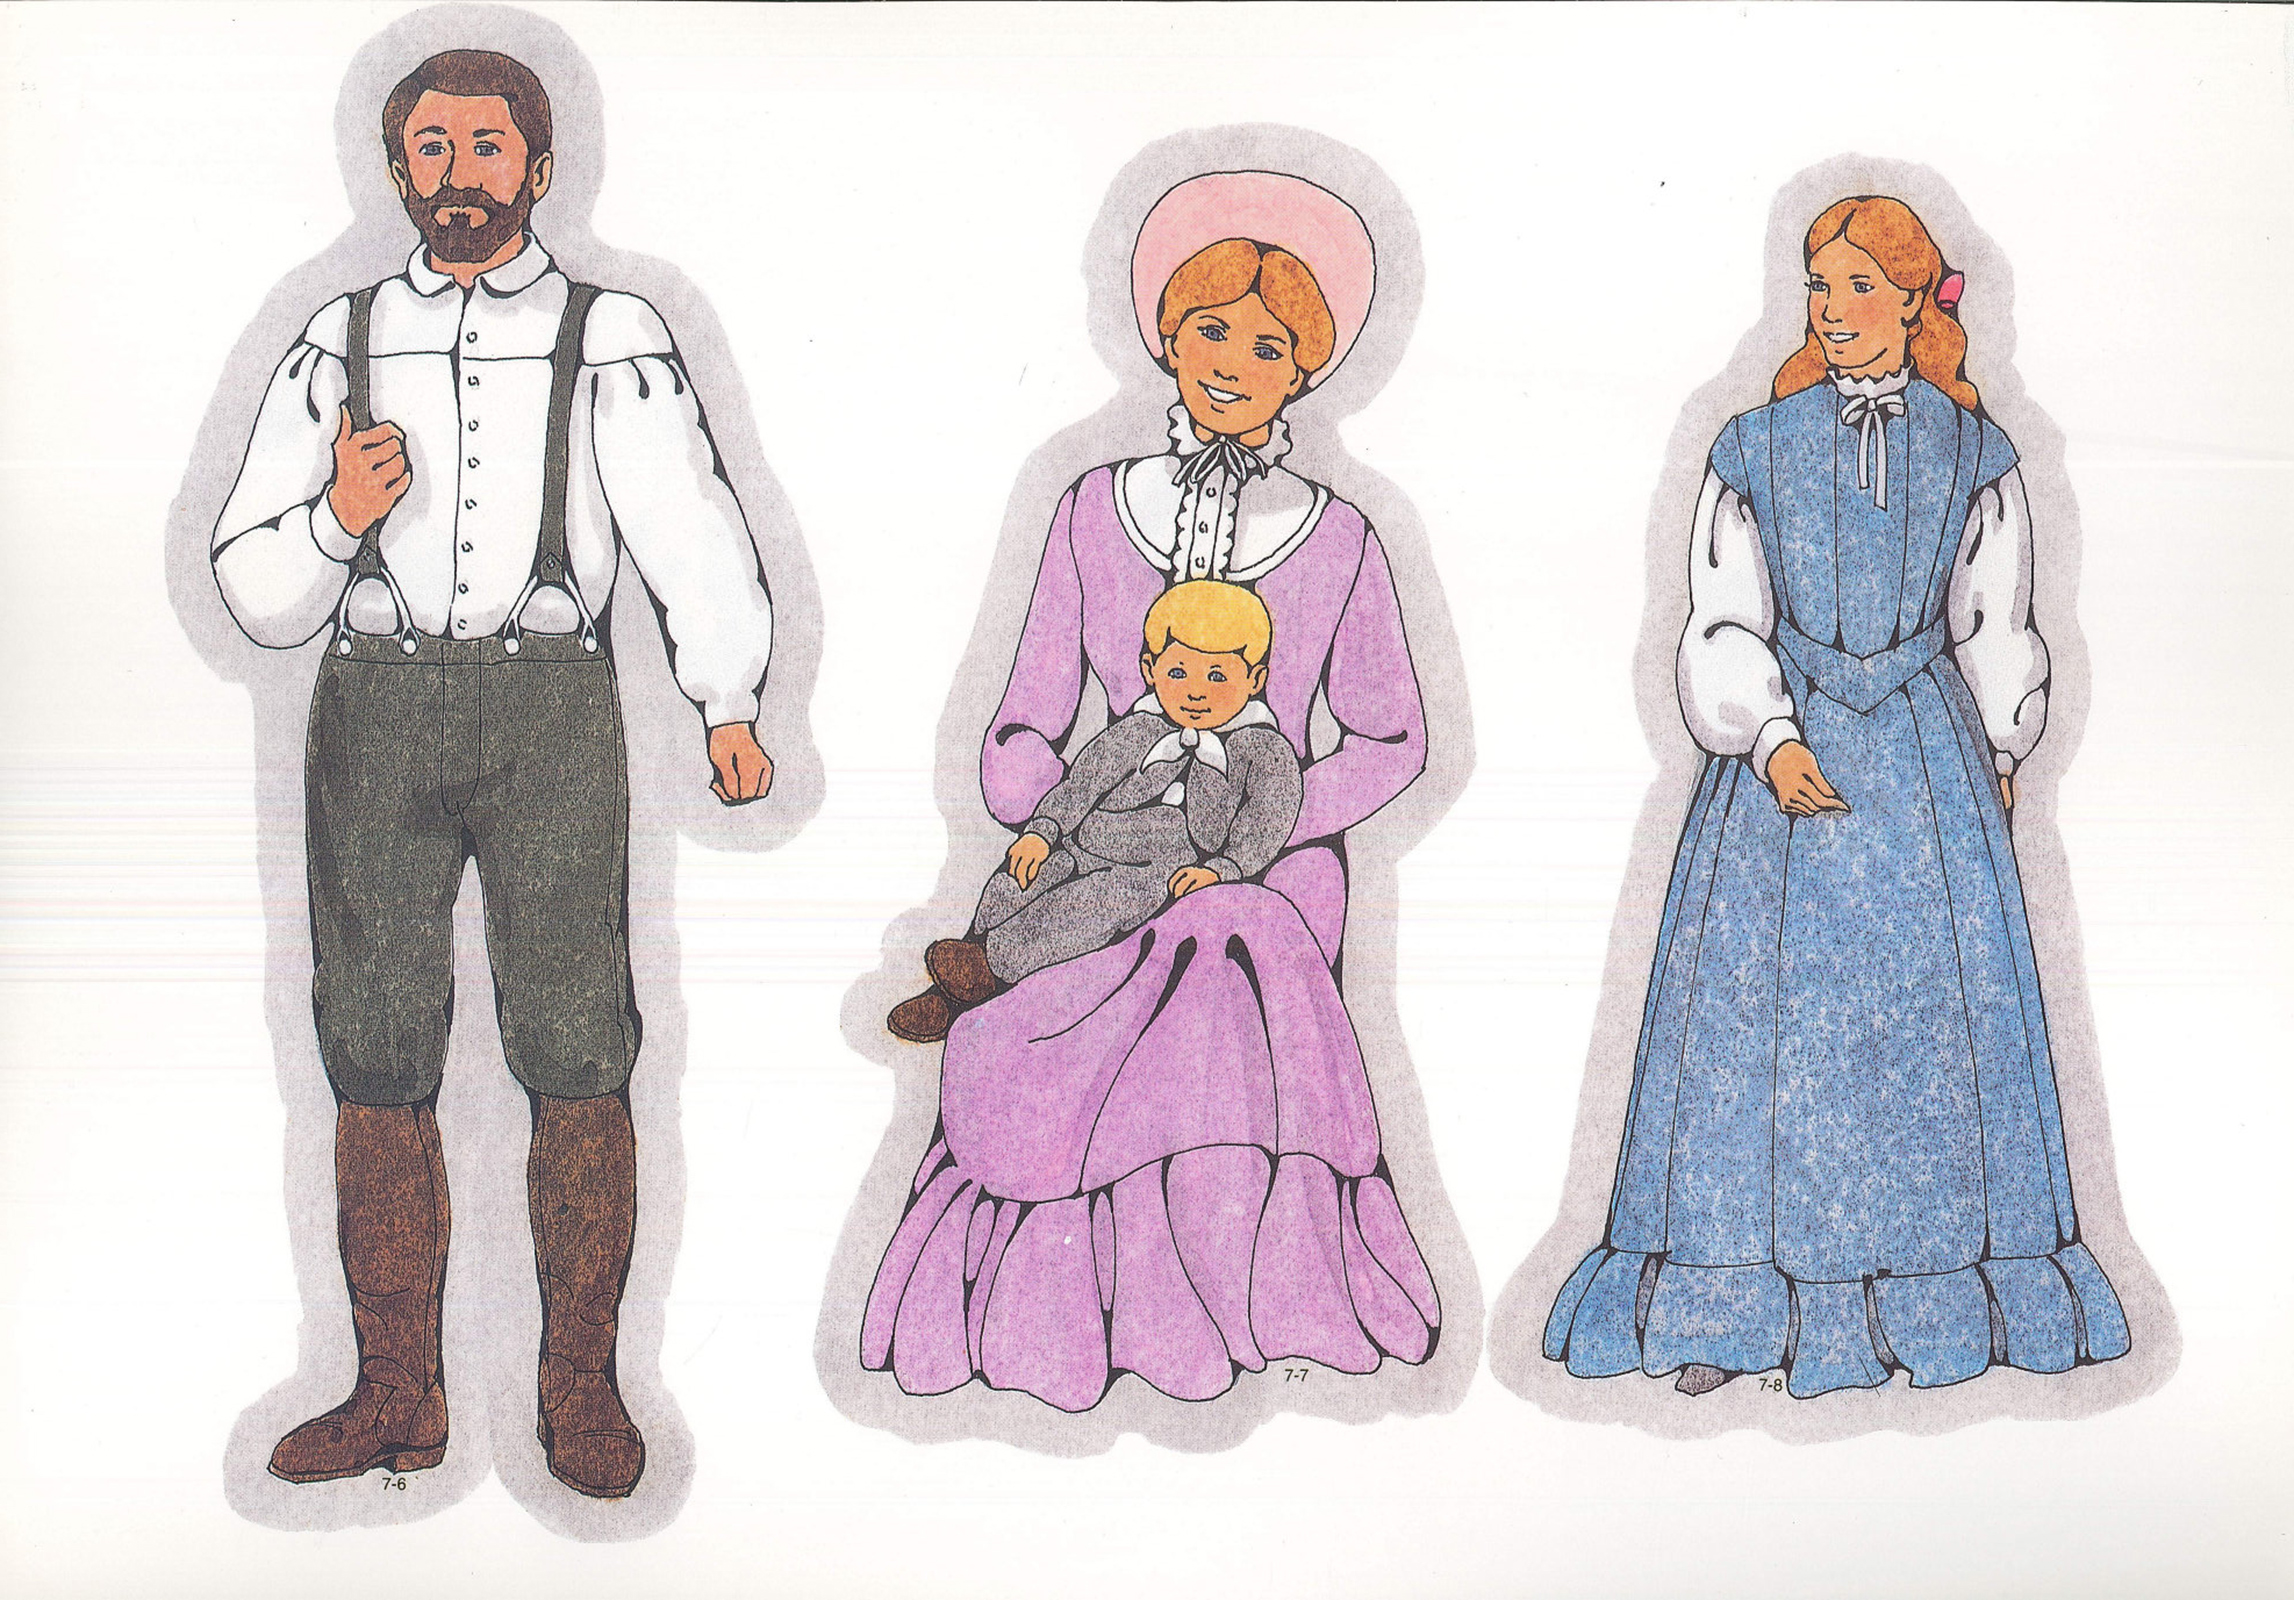 Free Frontier Woman Cliparts, Download Free Clip Art, Free.